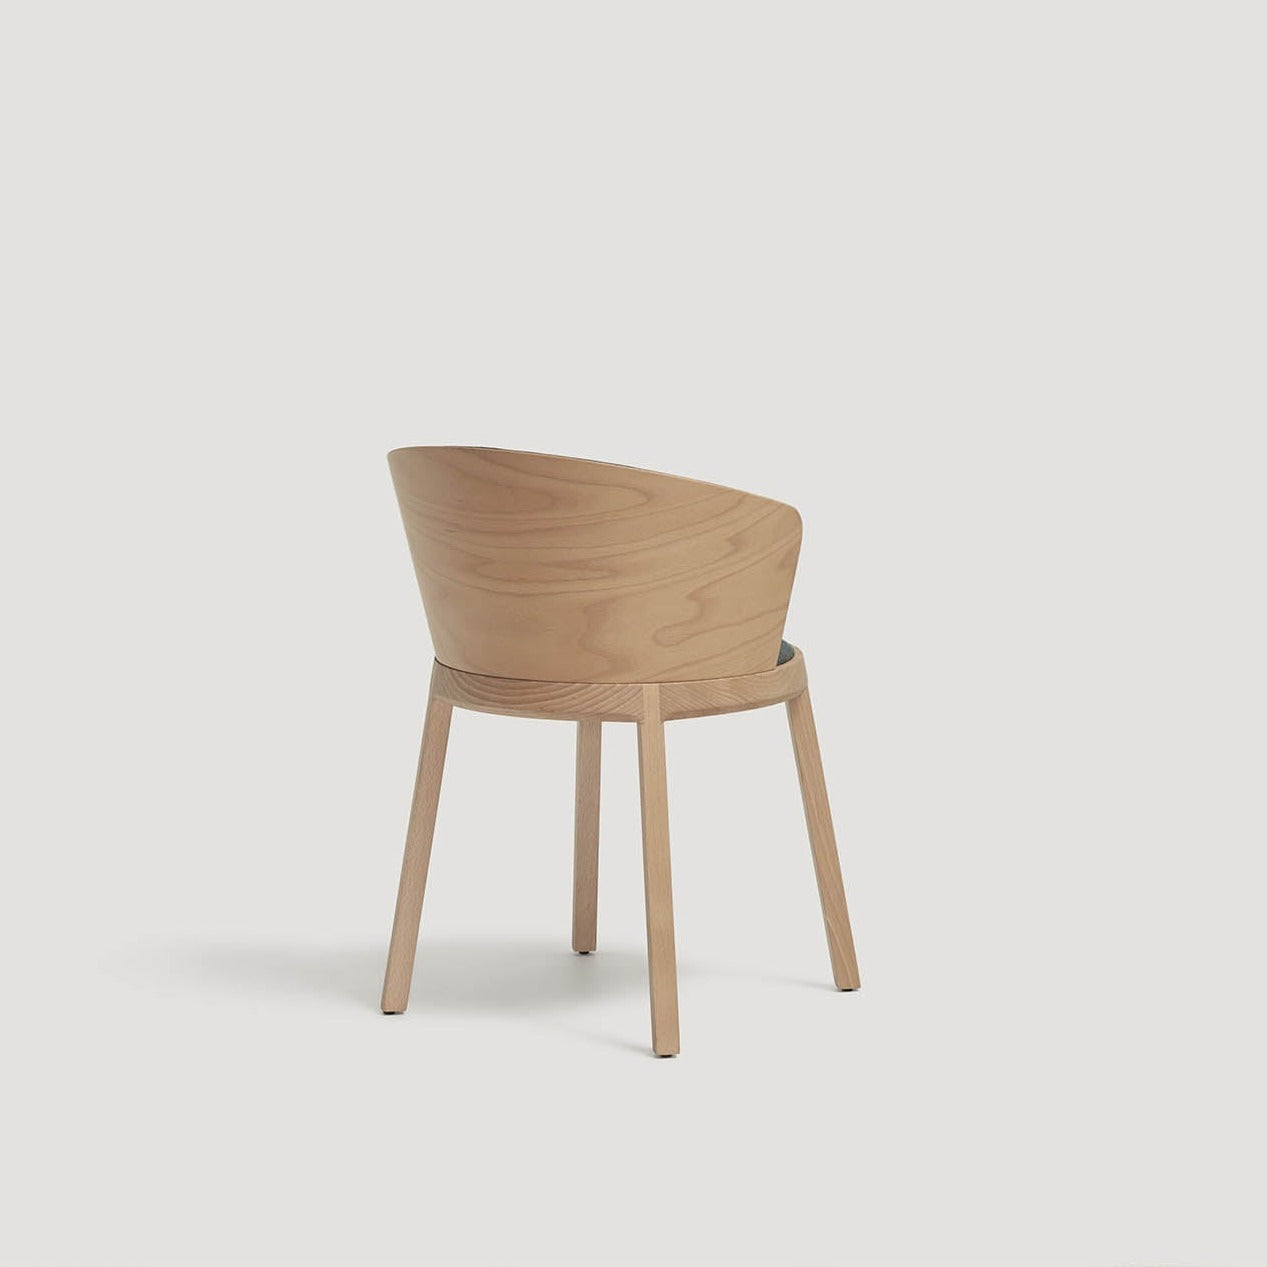 SILLA ARO Chair back view, natural base and backrest